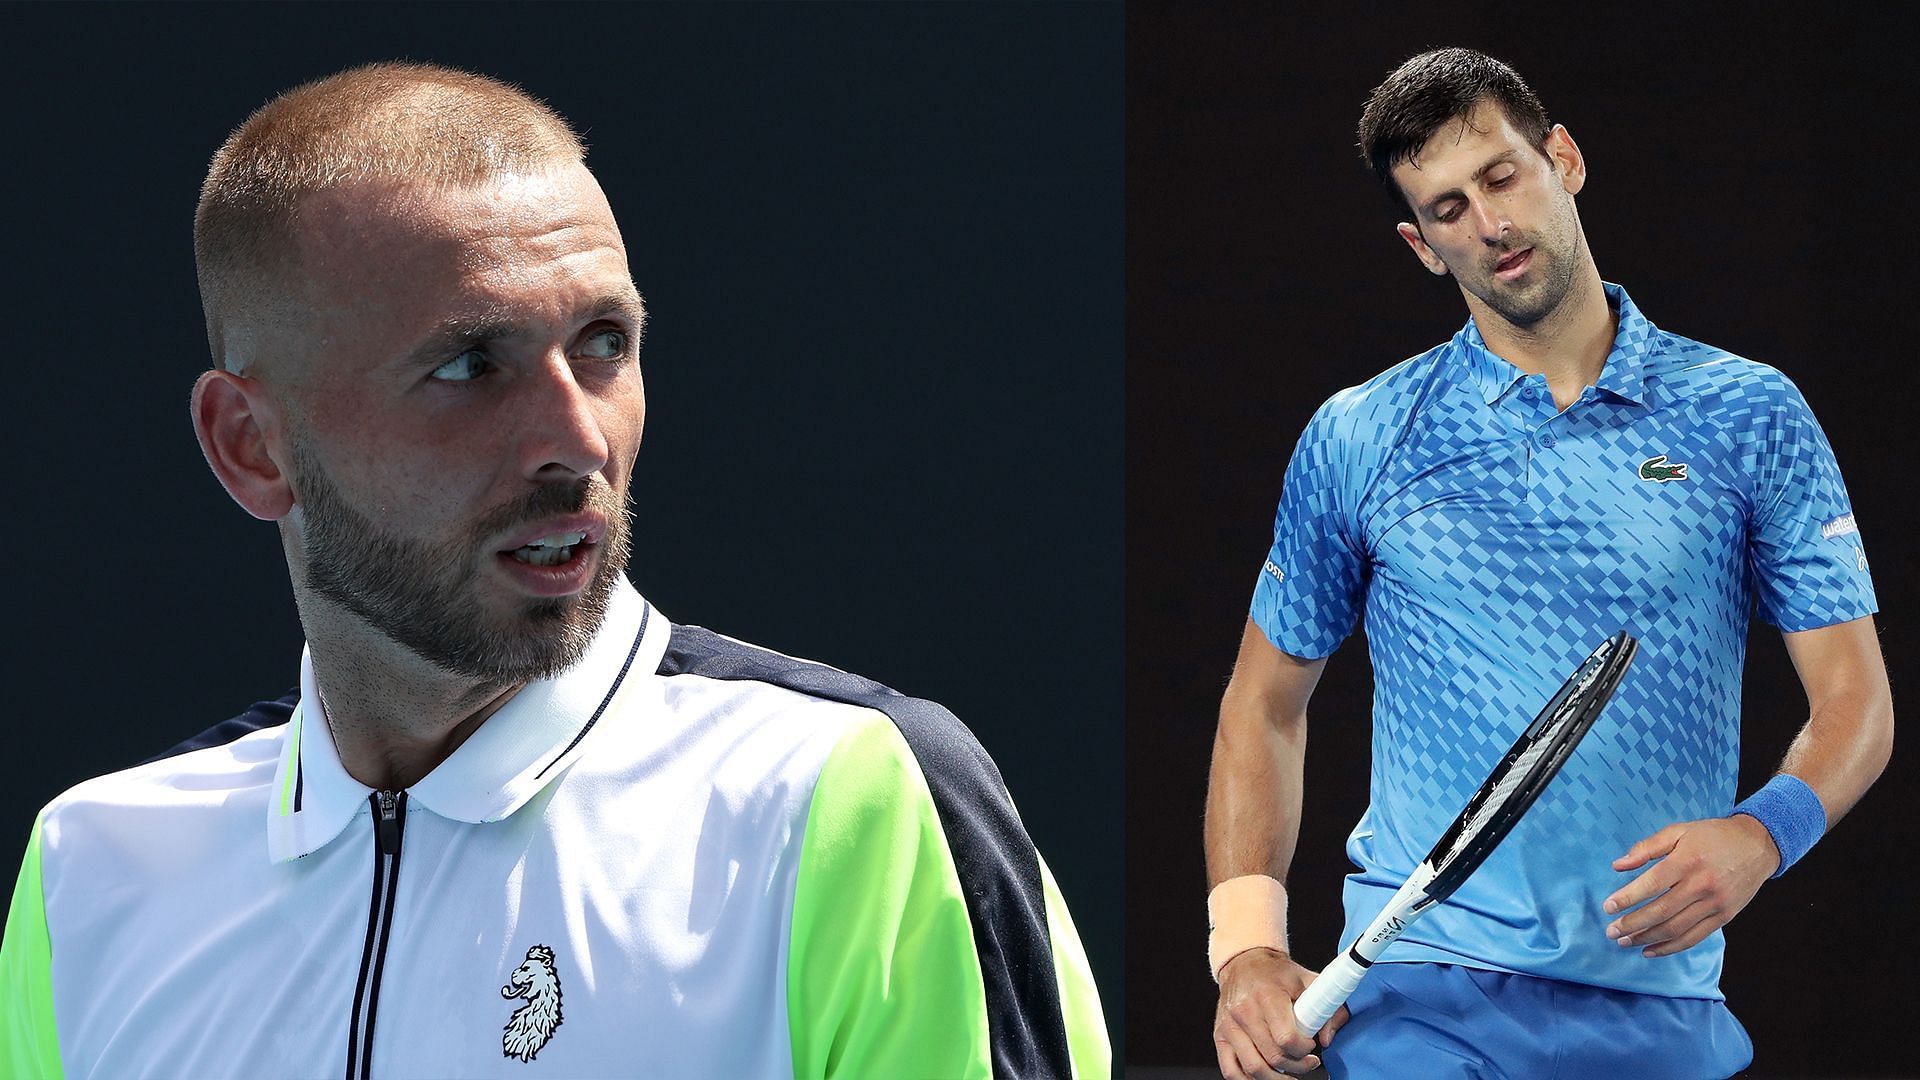 Dan Evans explains why he's aligned with ATP and not the Novak Djokovic-led PTPA